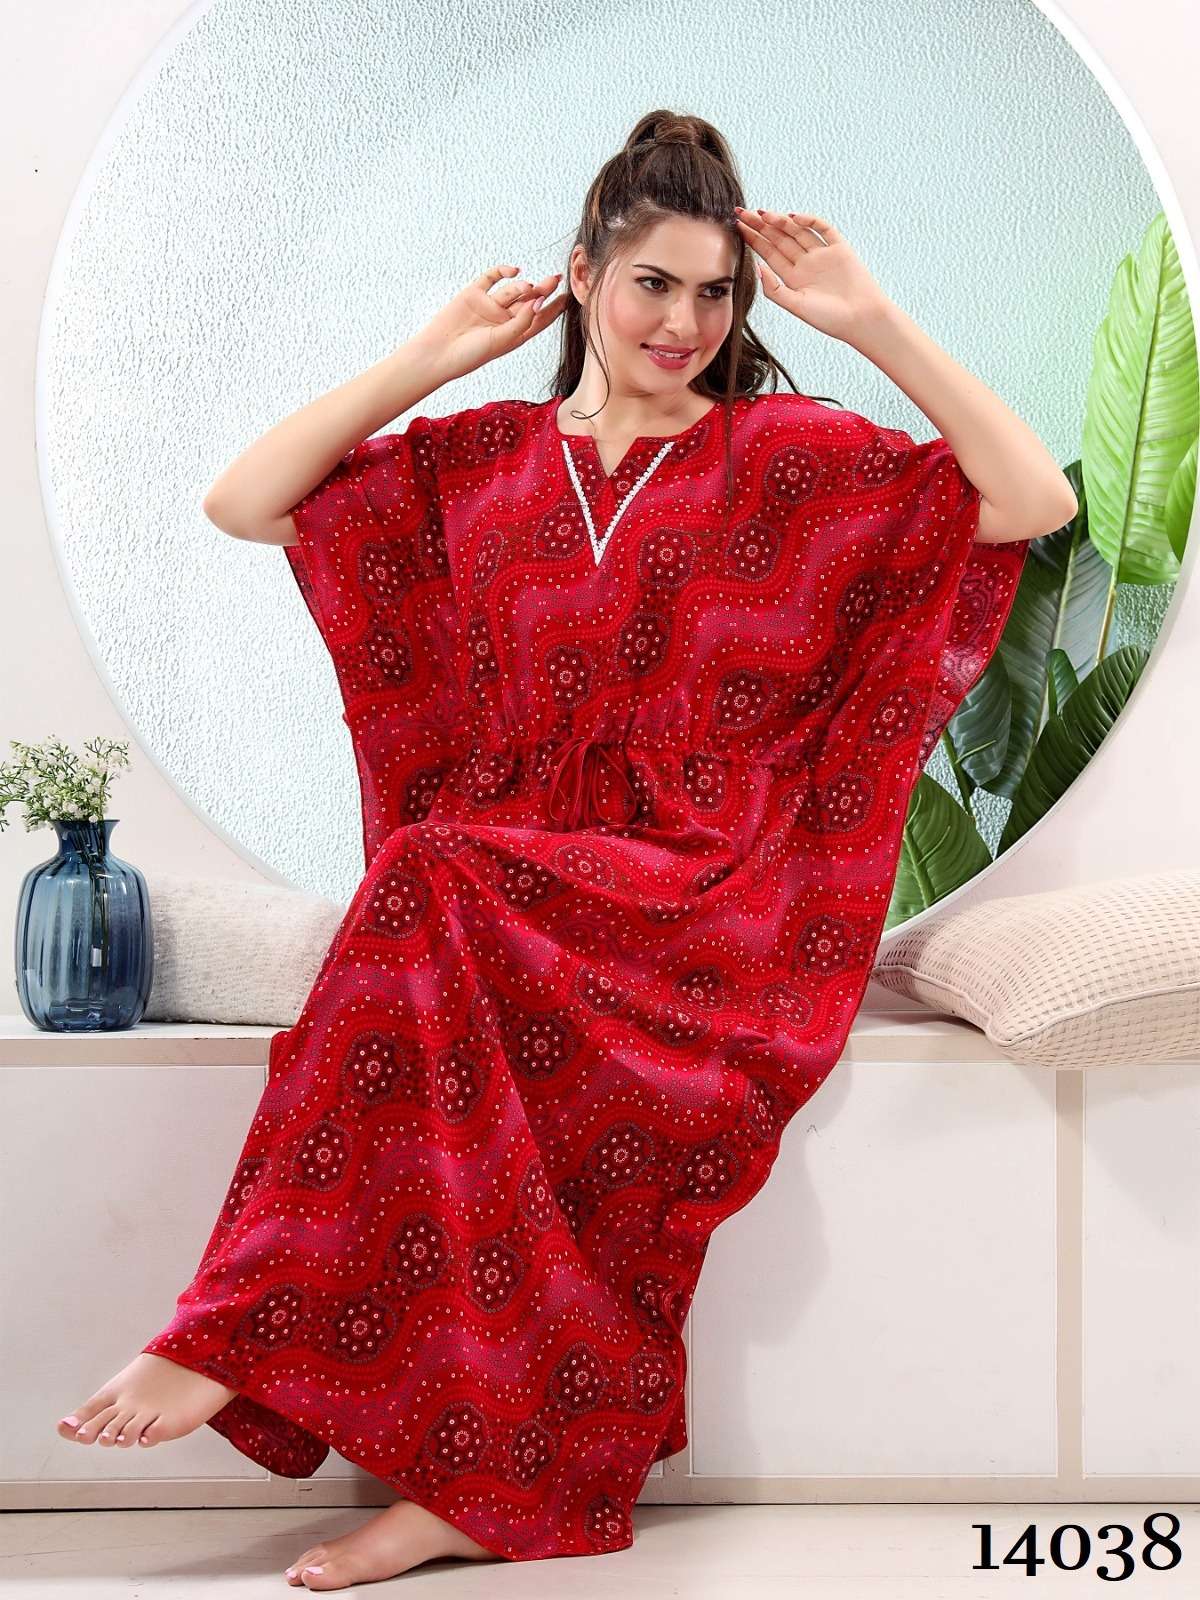 KBNBJ Women's Cotton Printed Night Gown Nighty Combo Pack of 3 - Free Size